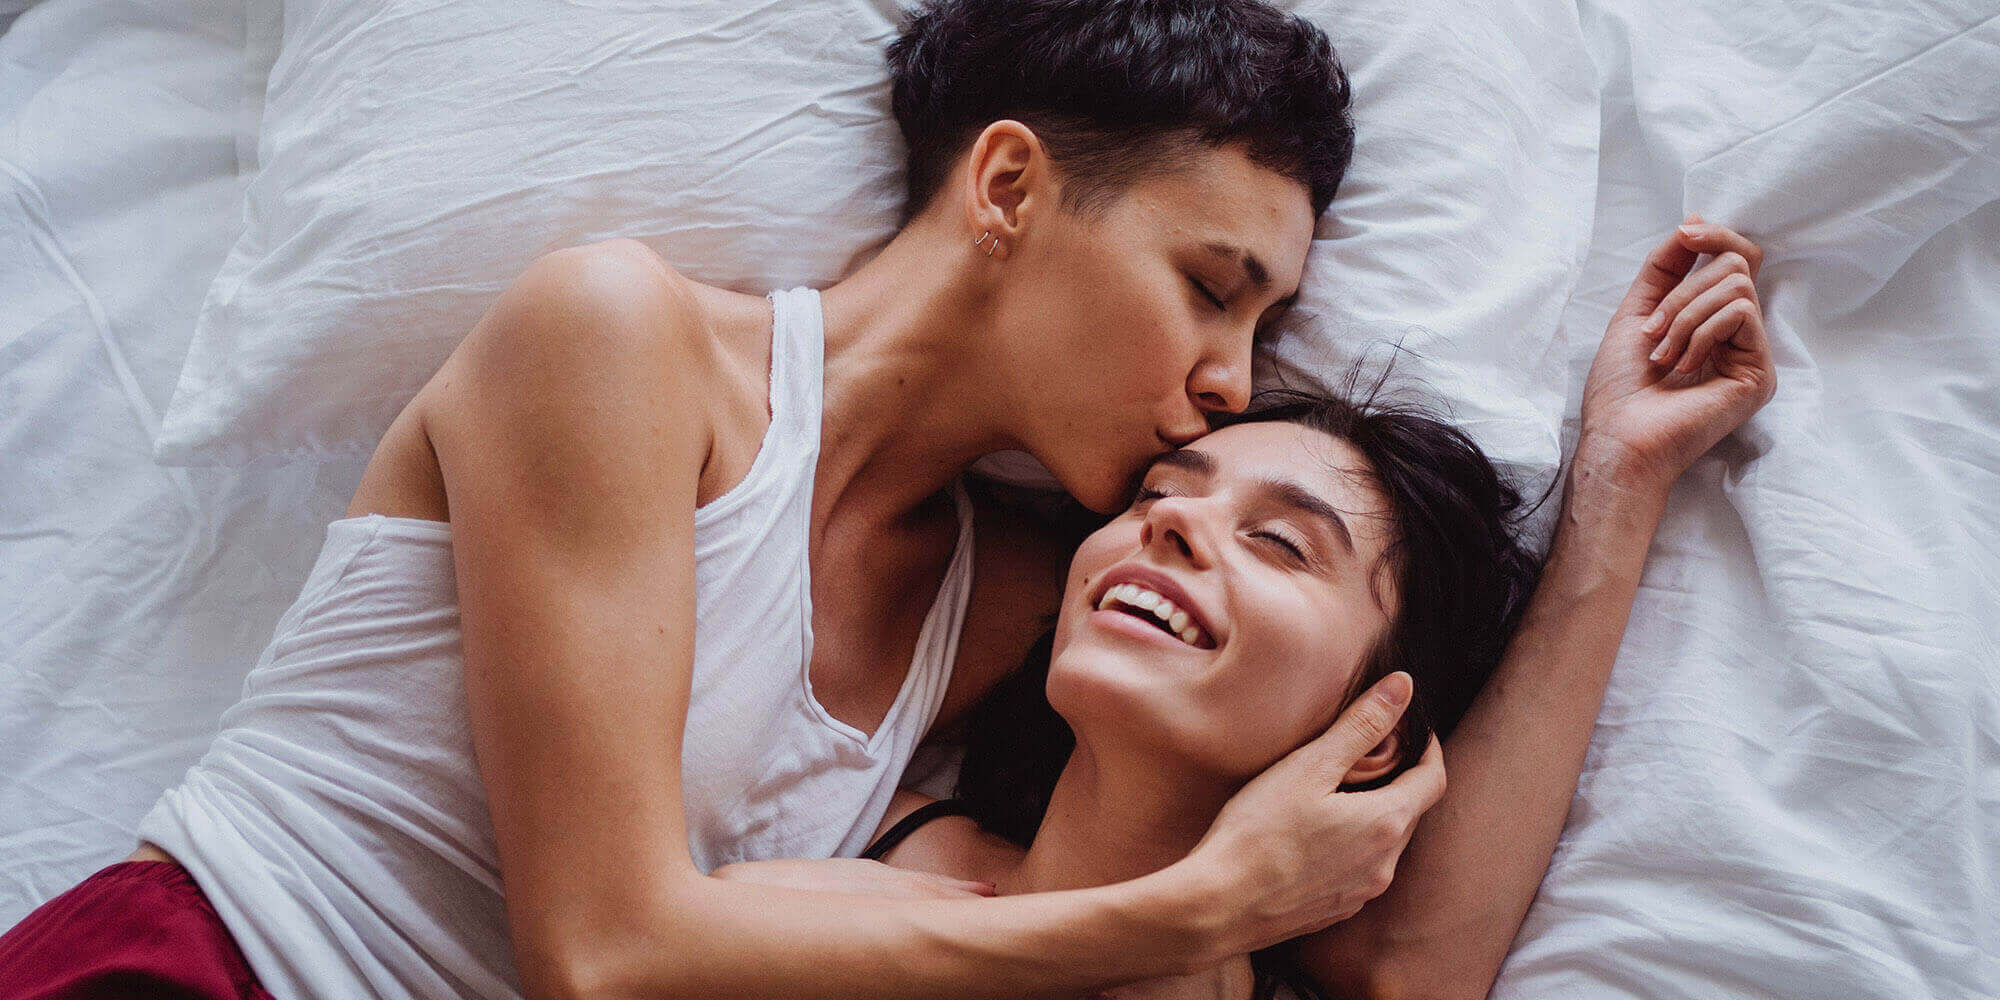 Two women cuddling in bed, and one is kissing the other's forehead